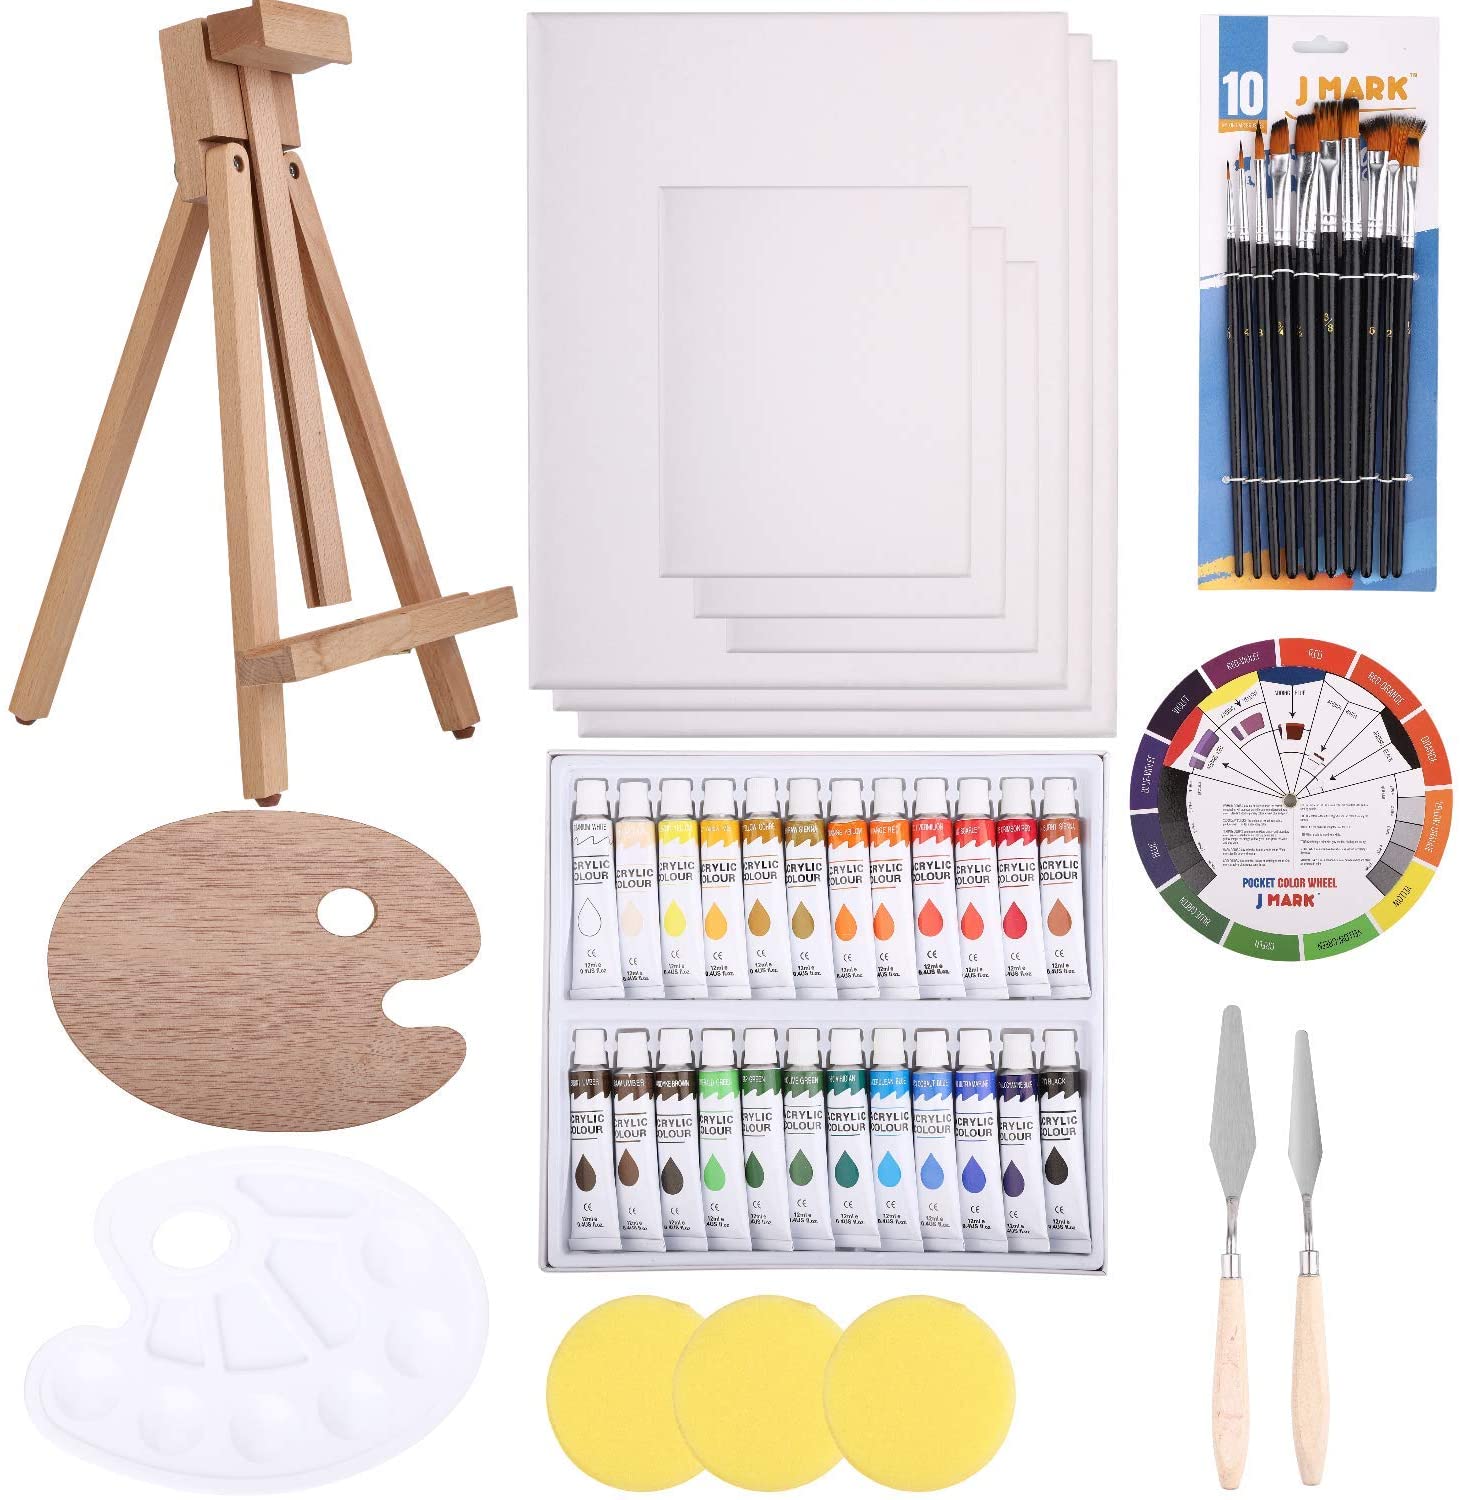 48pc Deluxe Painting Kits for Adults - Includes Adjustable Wood Easels, 10  Brushes Set, 24 Acrylic Paints, Wooden and Plastic Palettes, 2 Painting